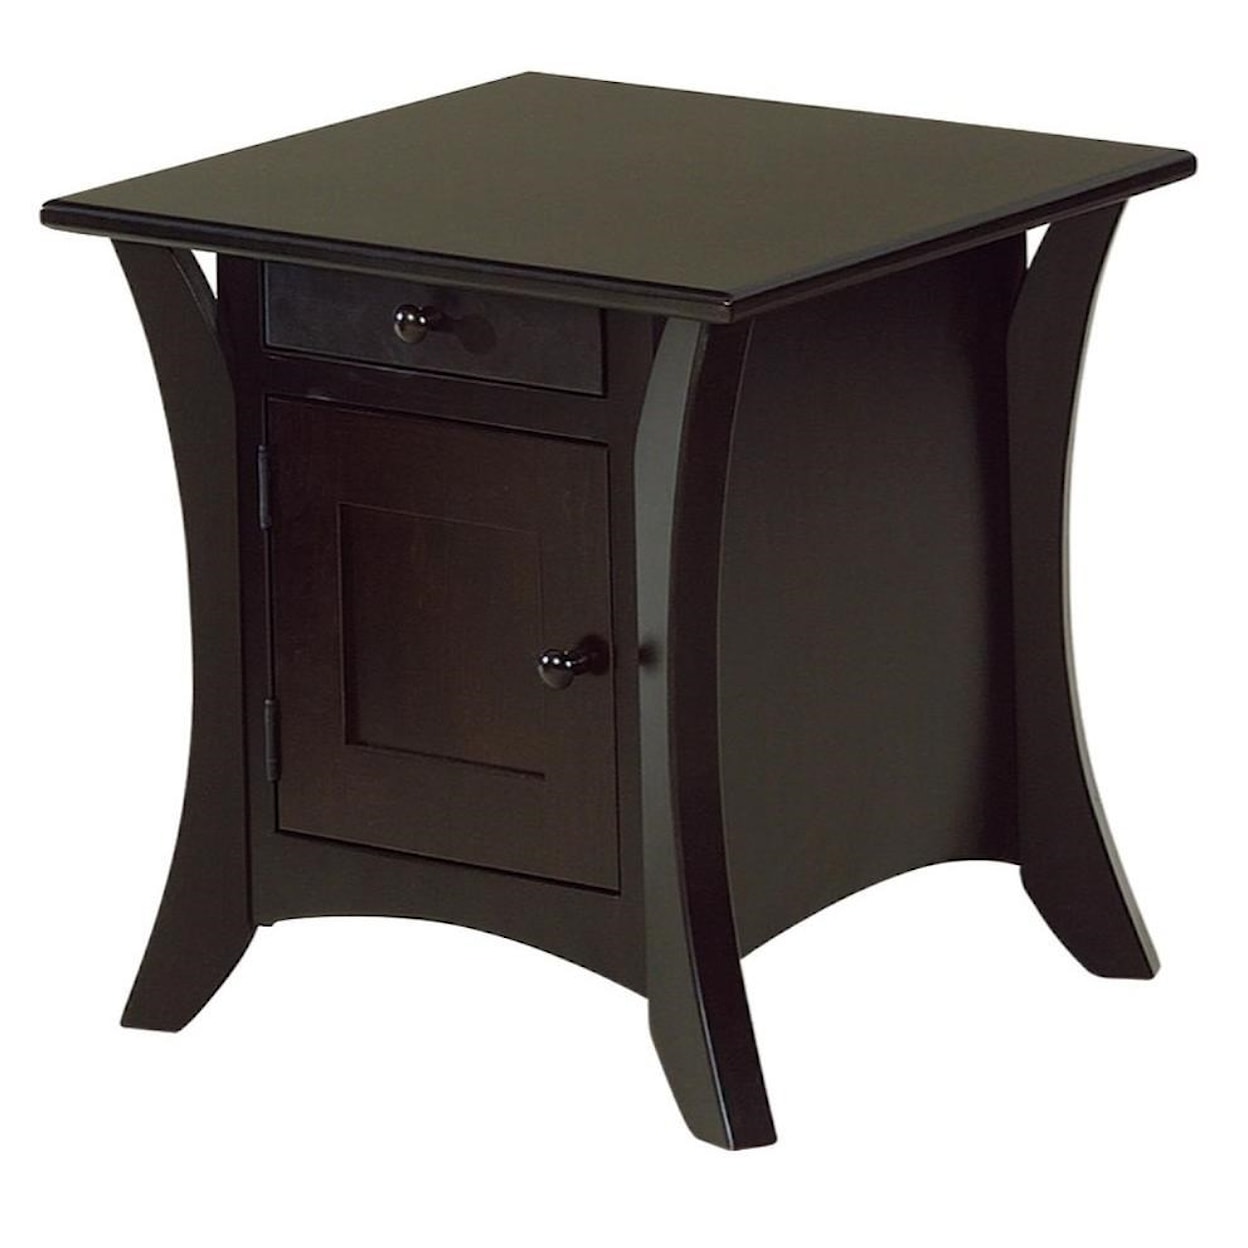 Crystal Valley Hardwoods Caledonia End Table